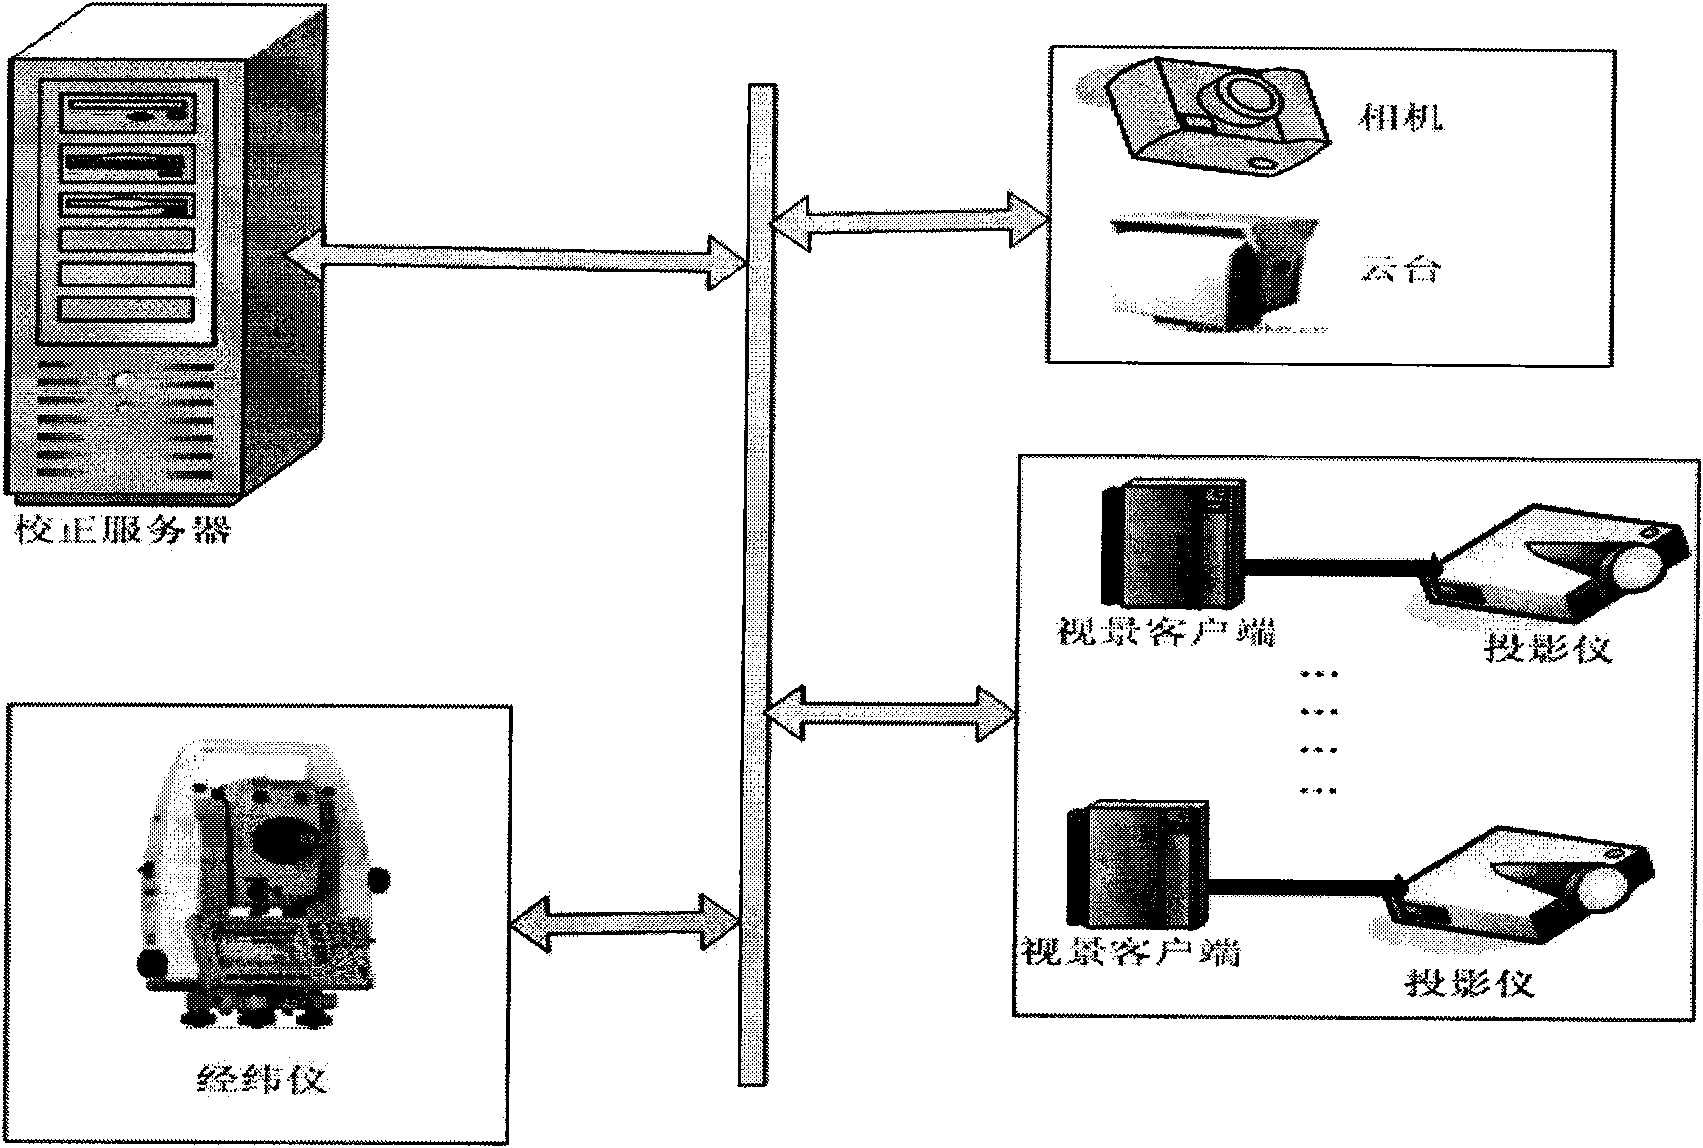 Computer vision precision measurement based multi-projection visual automatic geometric correction and splicing method